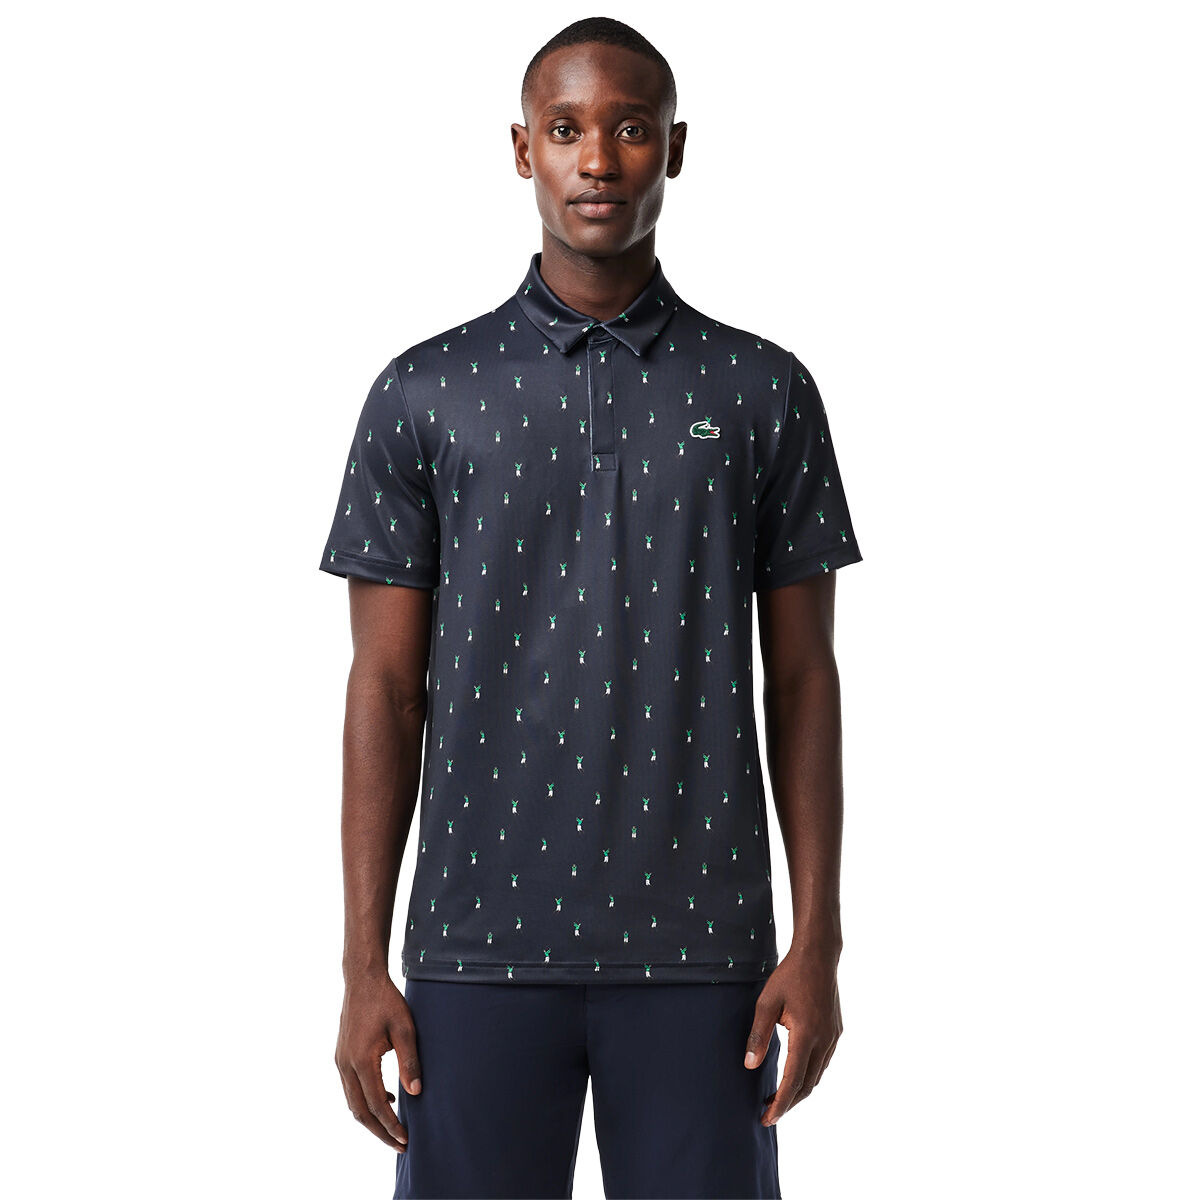 Lacoste Men's All-Over Print Golf Polo Shirt, Mens, Navy blue, Xxl | American Golf von Lacoste